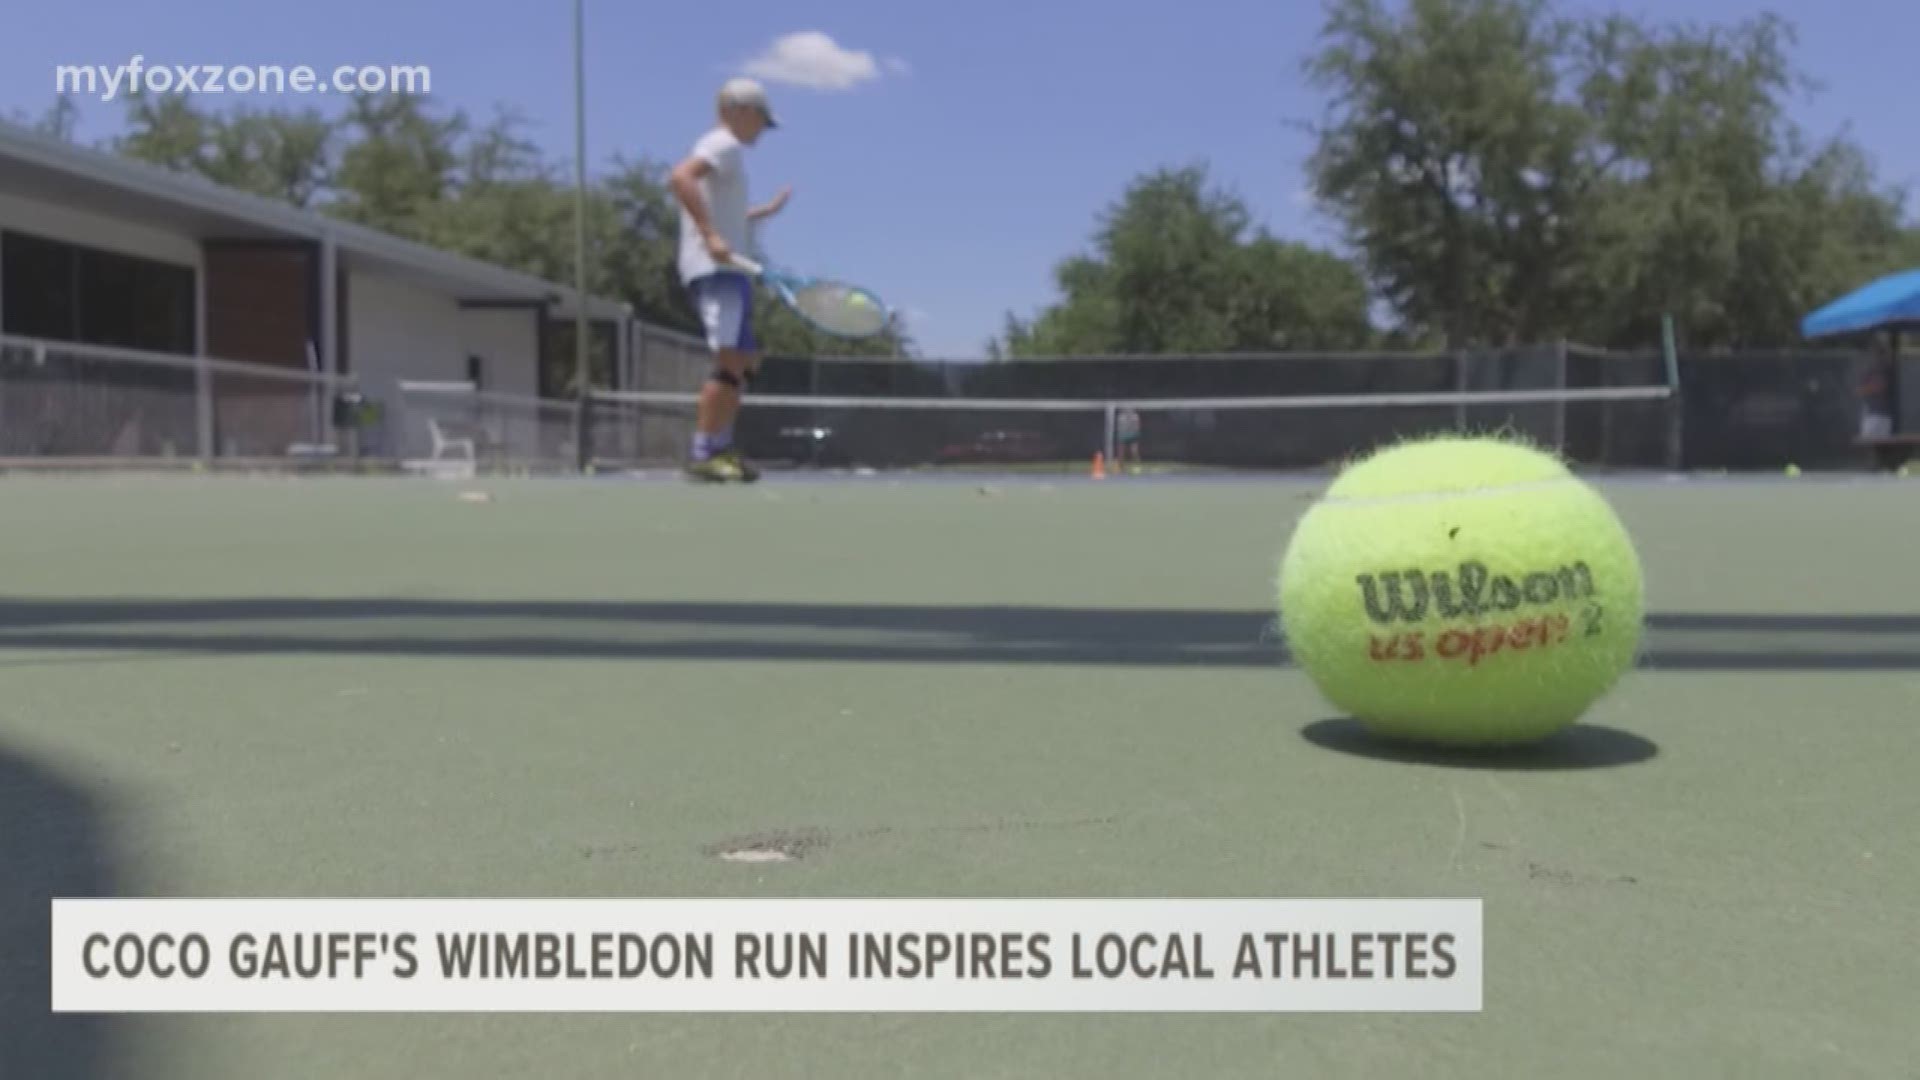 Coco Gauff is now a household name in tennis and her inspirational run at Wimbledon has West Texas young athletes asking, "Why not me?"